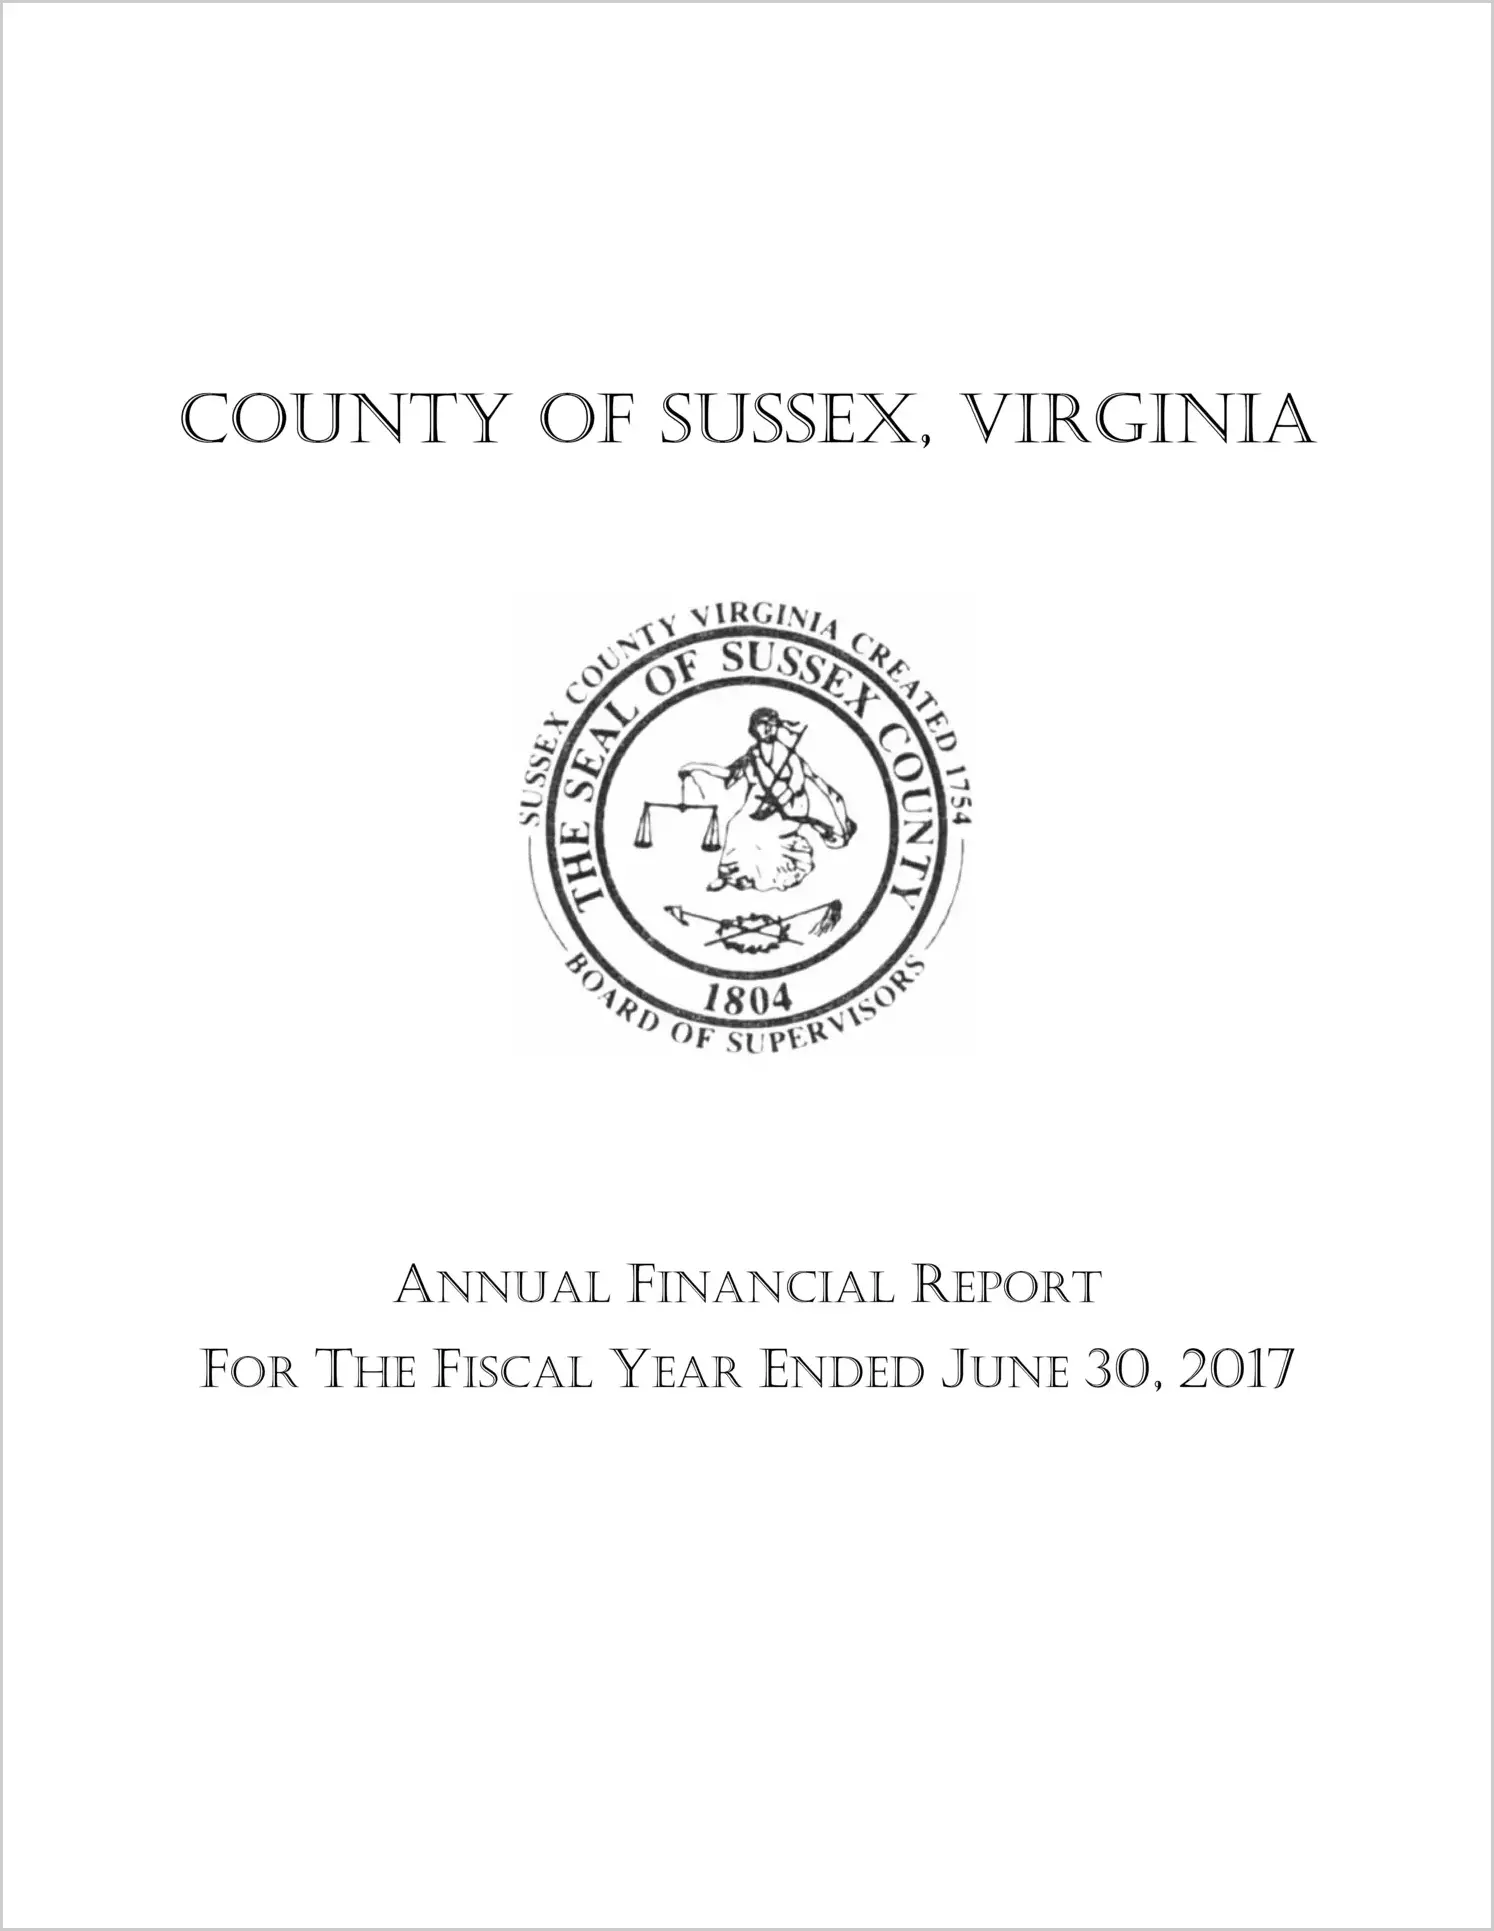 2017 Annual Financial Report for County of Sussex